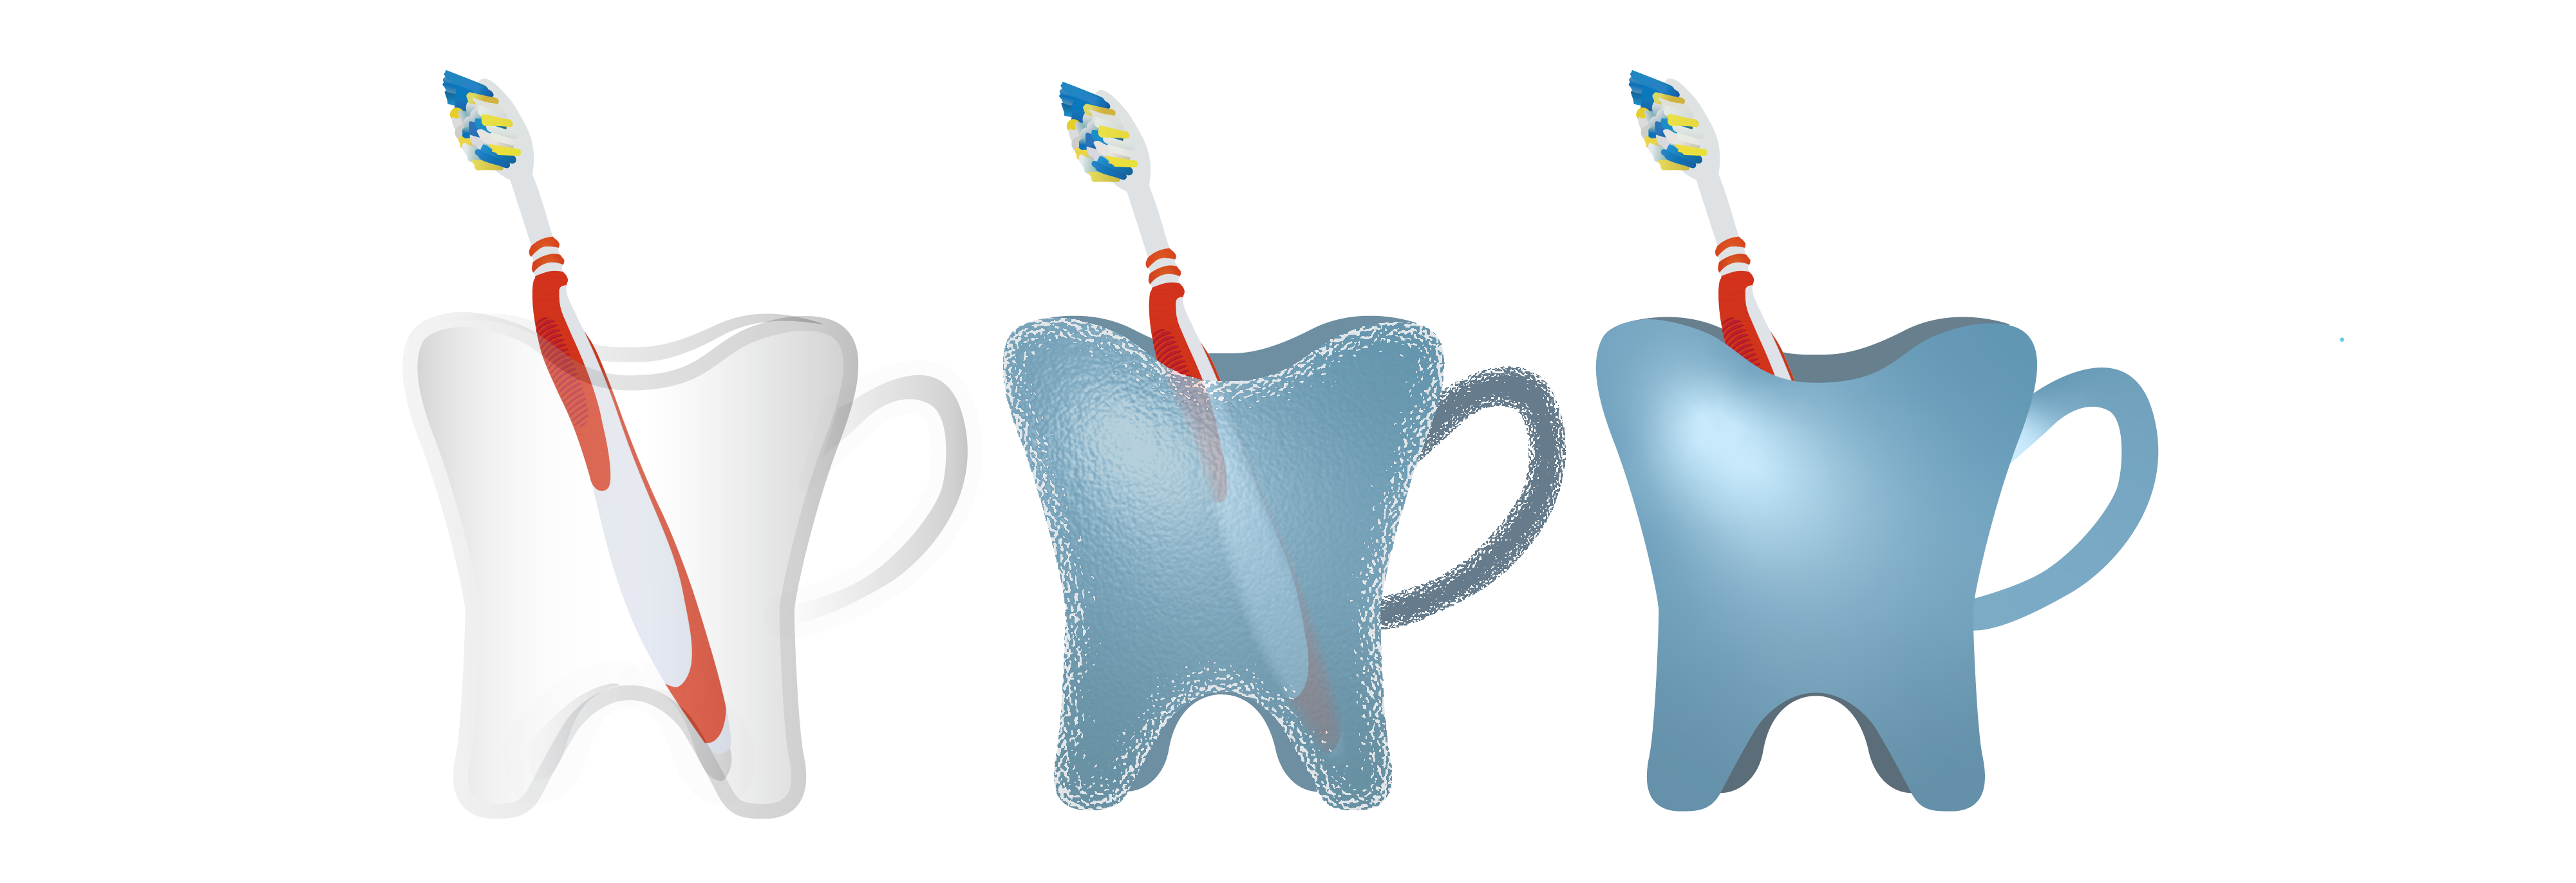 3 toothbrush holders, all shaped like a tooth, each hold a red toothbrush. The first holder is transparent and the toothbrush is completely visible through glass, the second one is translucent and the toothbrush is slightly less viable, and third one is opaque and the toothbrush inside is not visible.